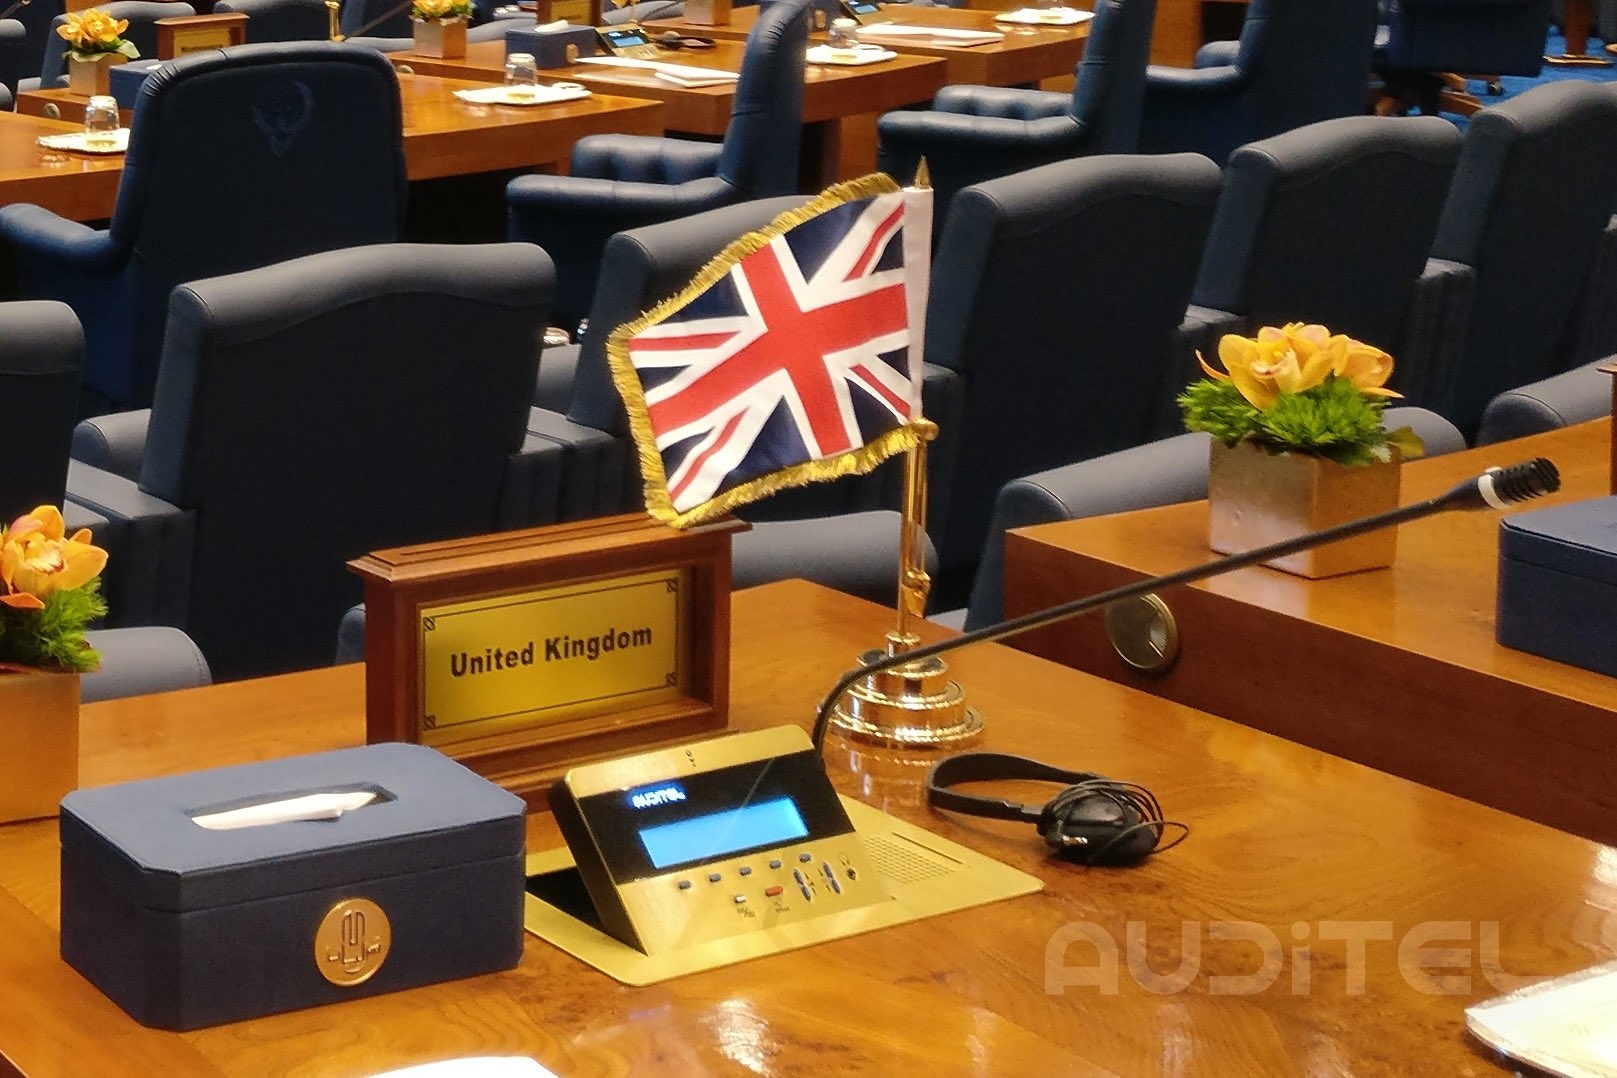 auditel-diplomat-conference-made-in-england.jpg